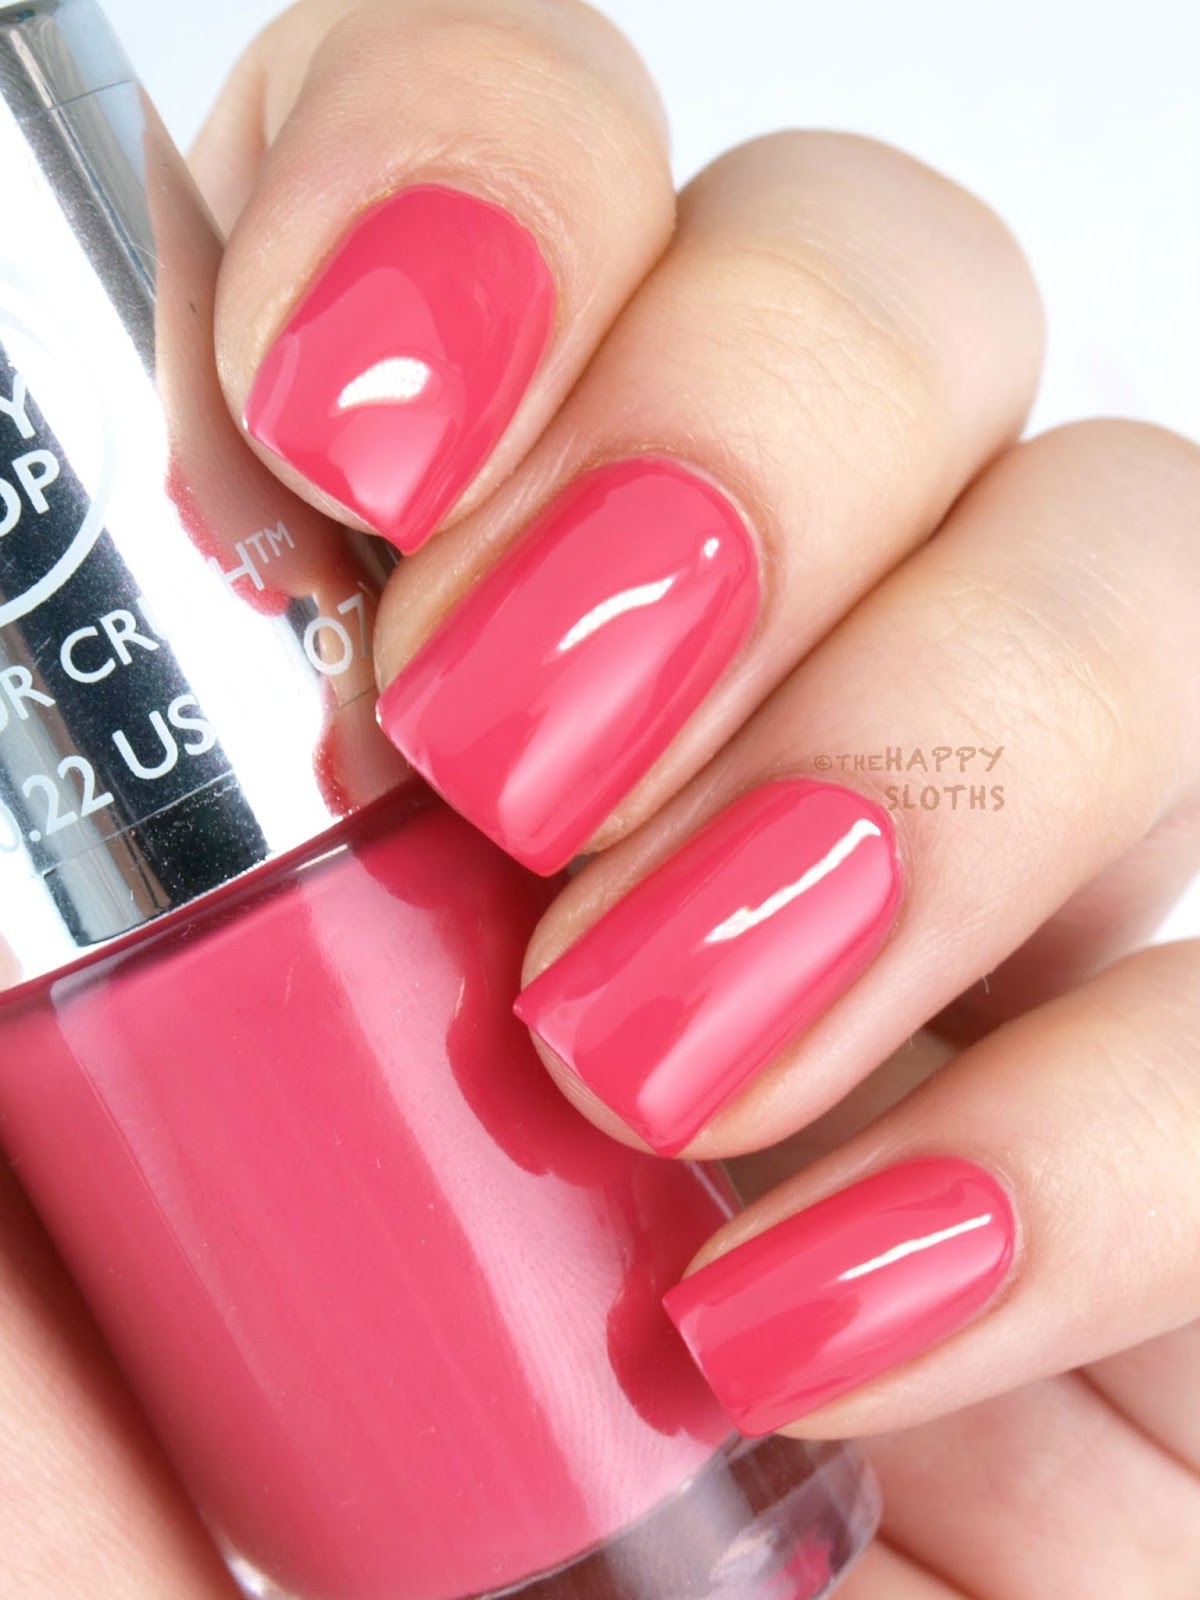 The Body Shop Color Crush Nails Nail Polish in "A Sunny Affair", "Cupid Pink" & "Mad About Blue": Review and Swatches